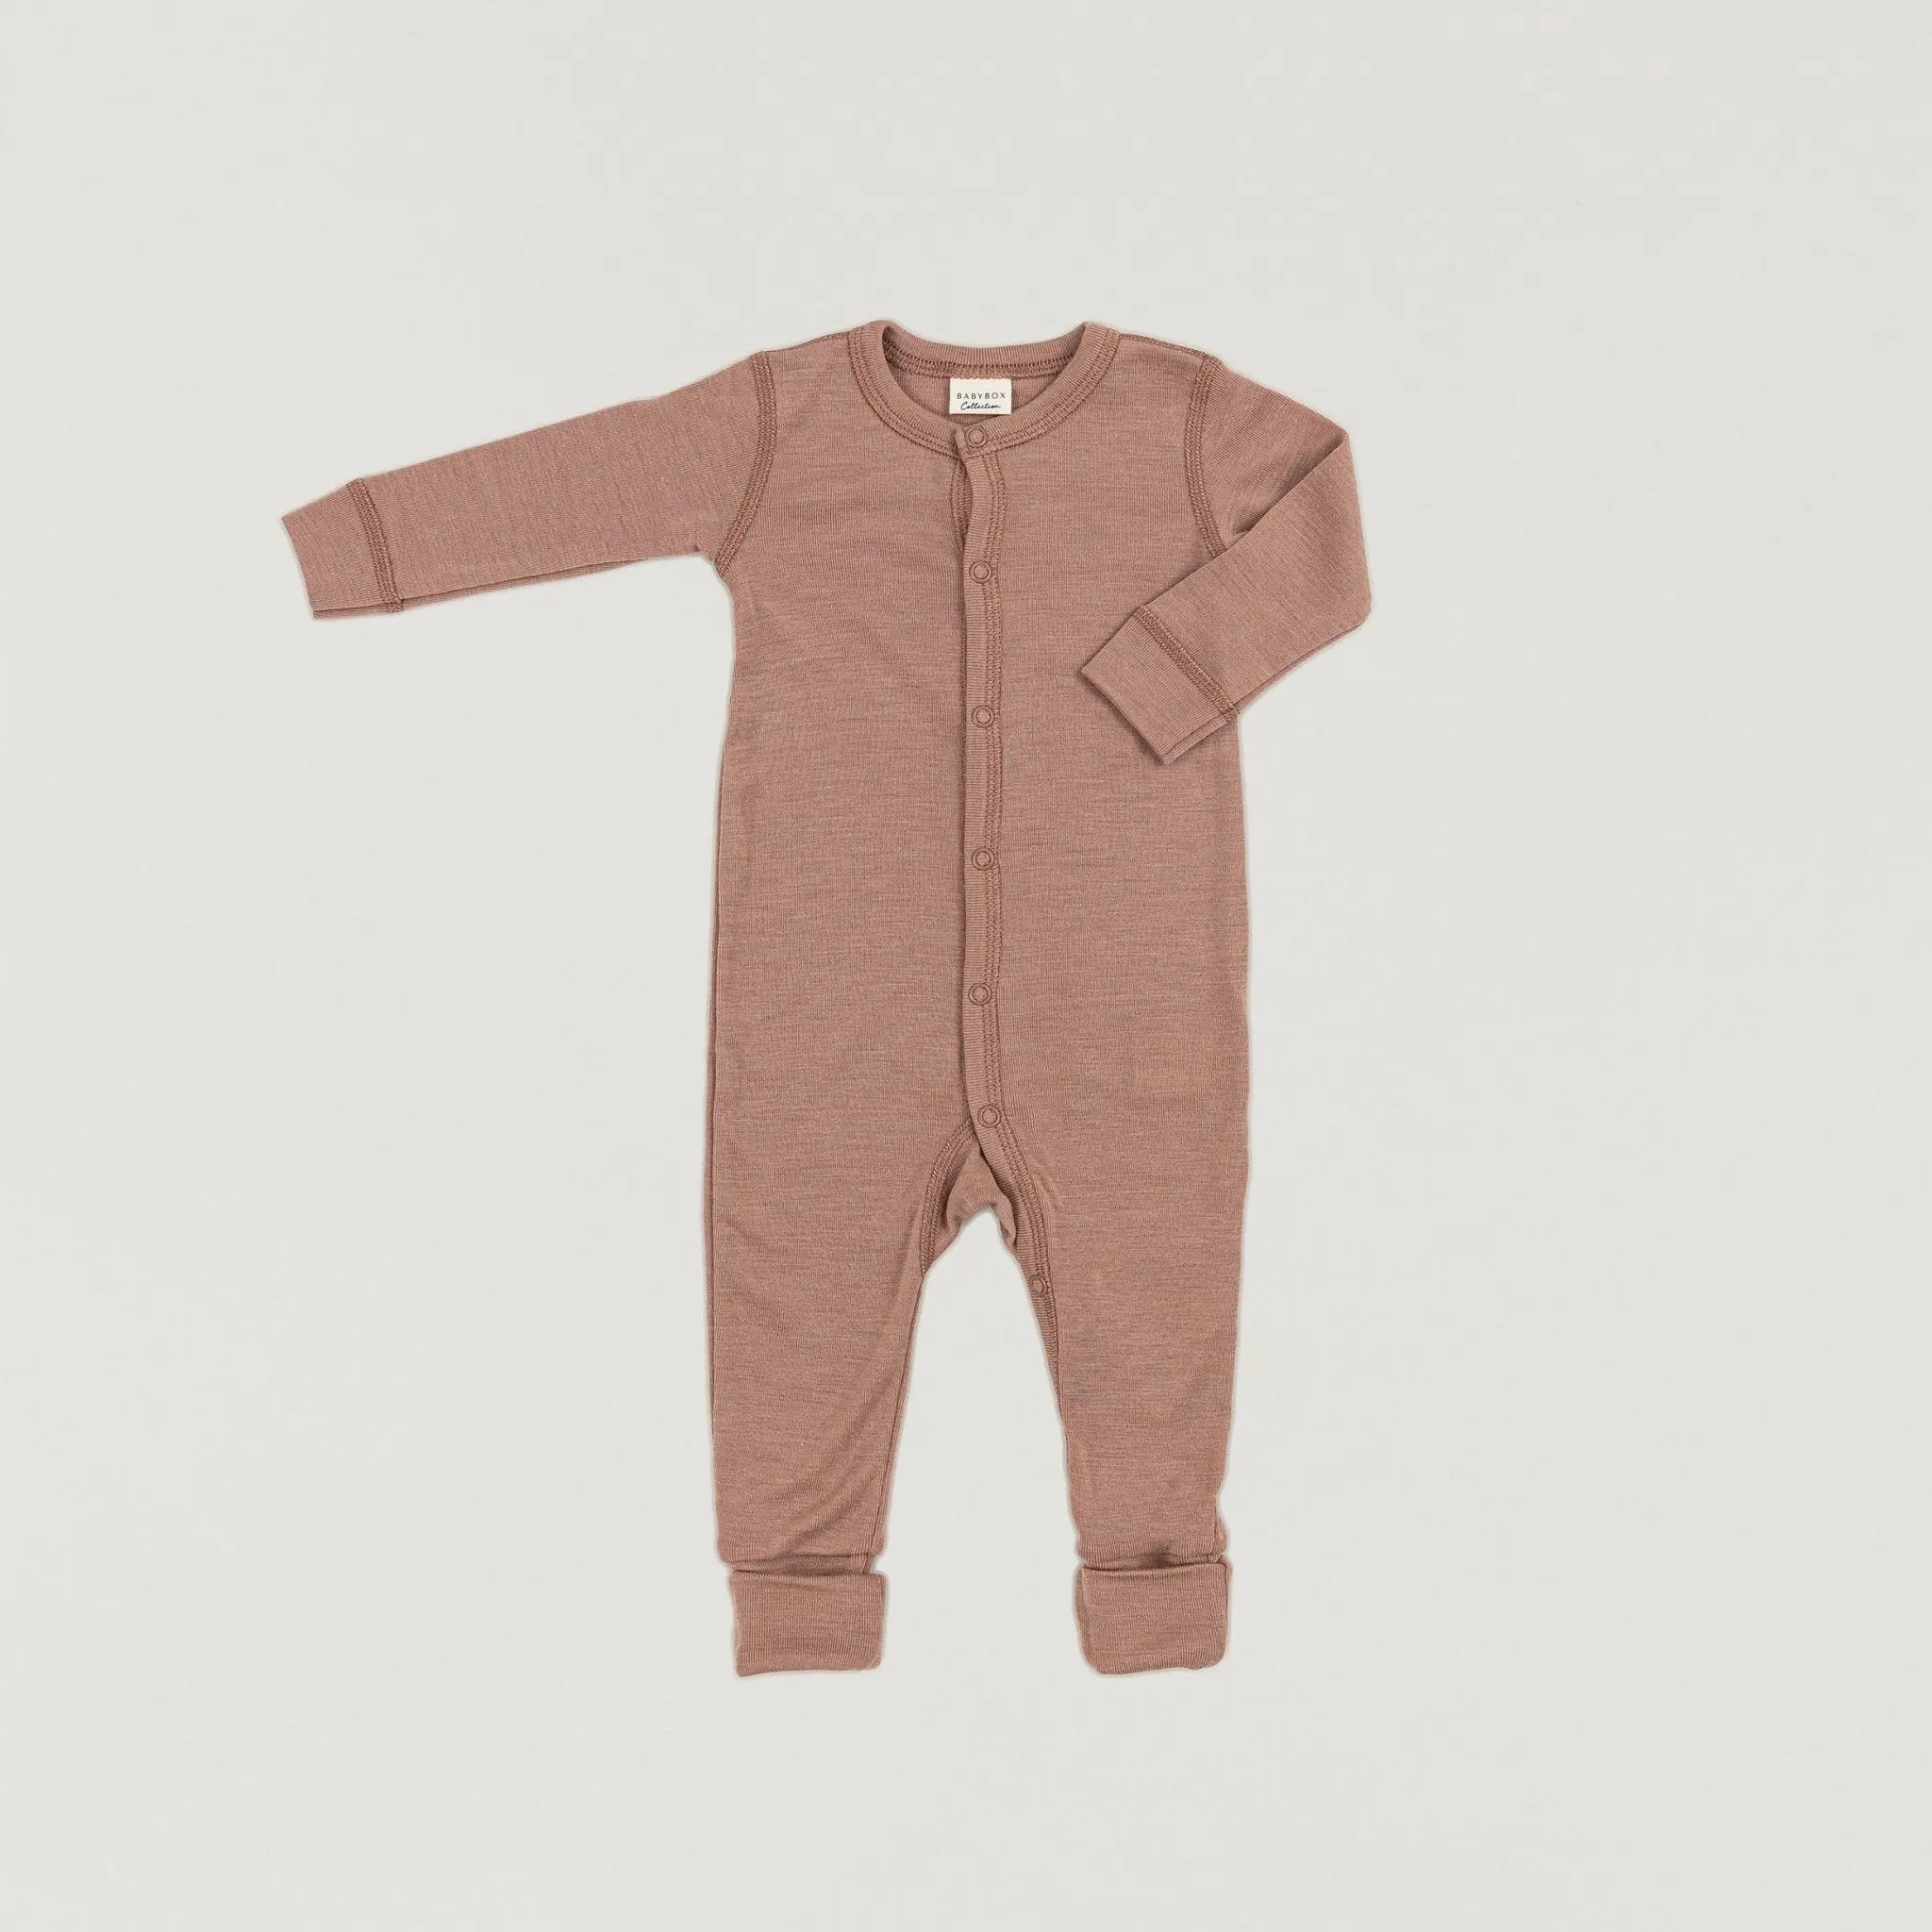 Babybox and Family BabyBox Collection Pyjama aus Wolle & Seide rose-fawn-bbcws 50 #farbe_rose-fawn-bbcws